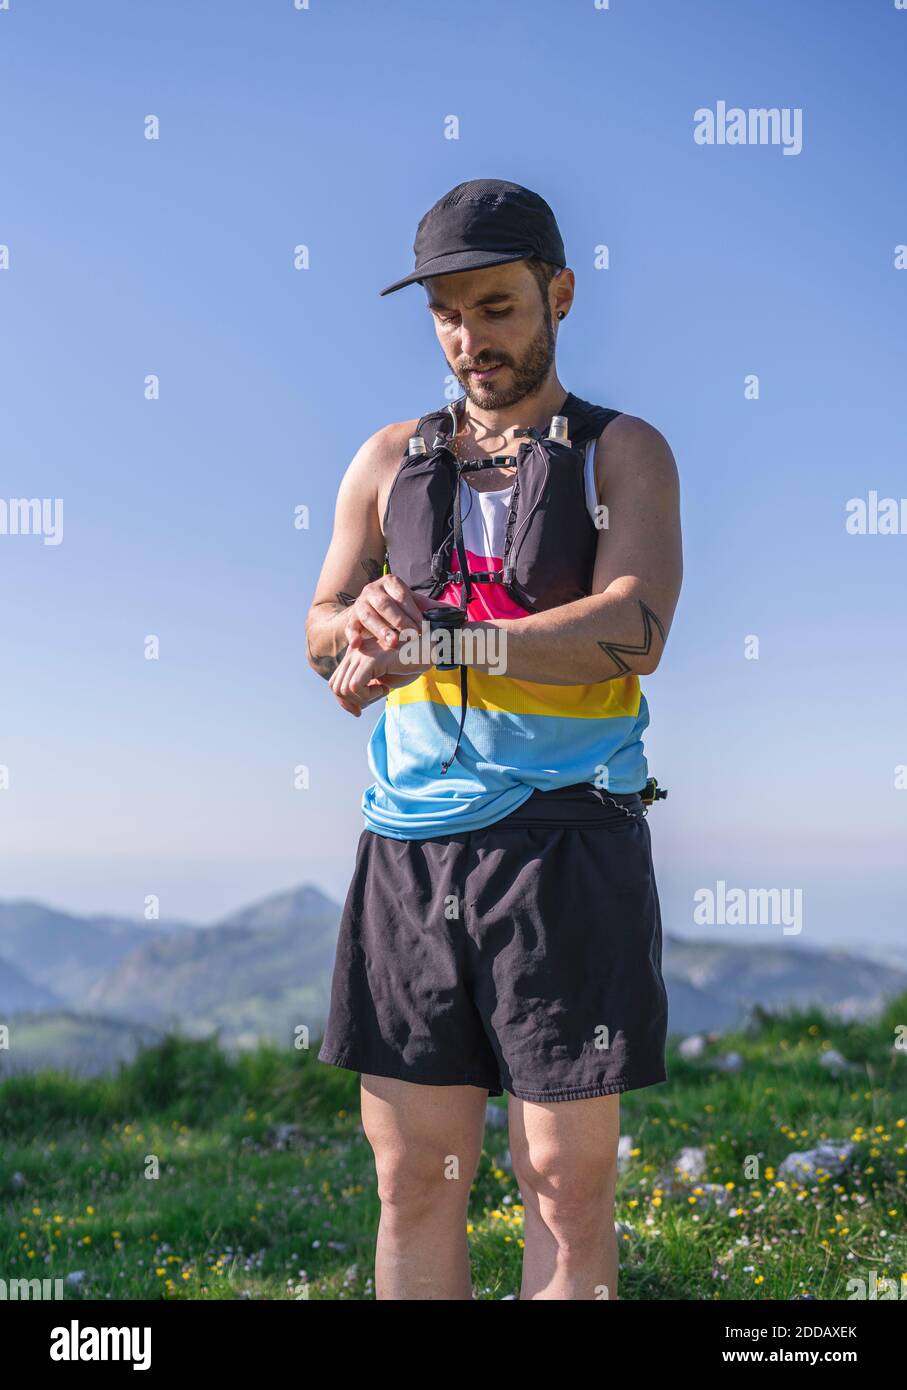 Mid adult man wearing cap and bottle strap checking time on watch while standing on mountain Stock Photo